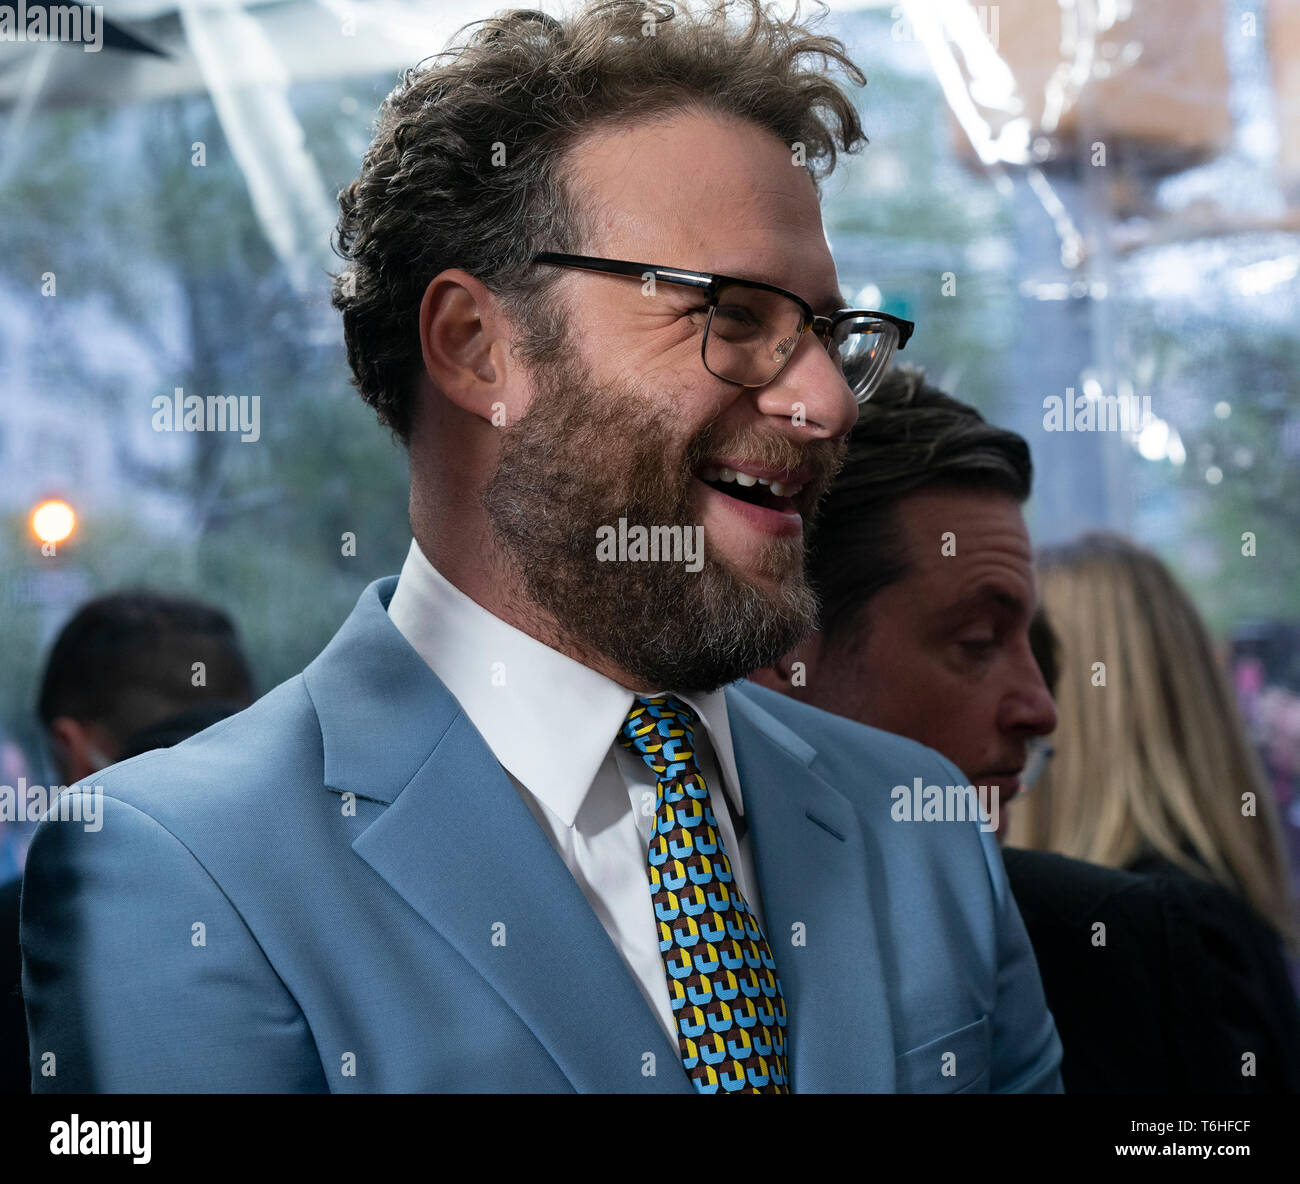 New York, United States. 30th Apr, 2019. Seth Rogen attends premiere of Long Shot at AMC Lincoln Center Theater Credit: Lev Radin/Pacific Press/Alamy Live News Stock Photo